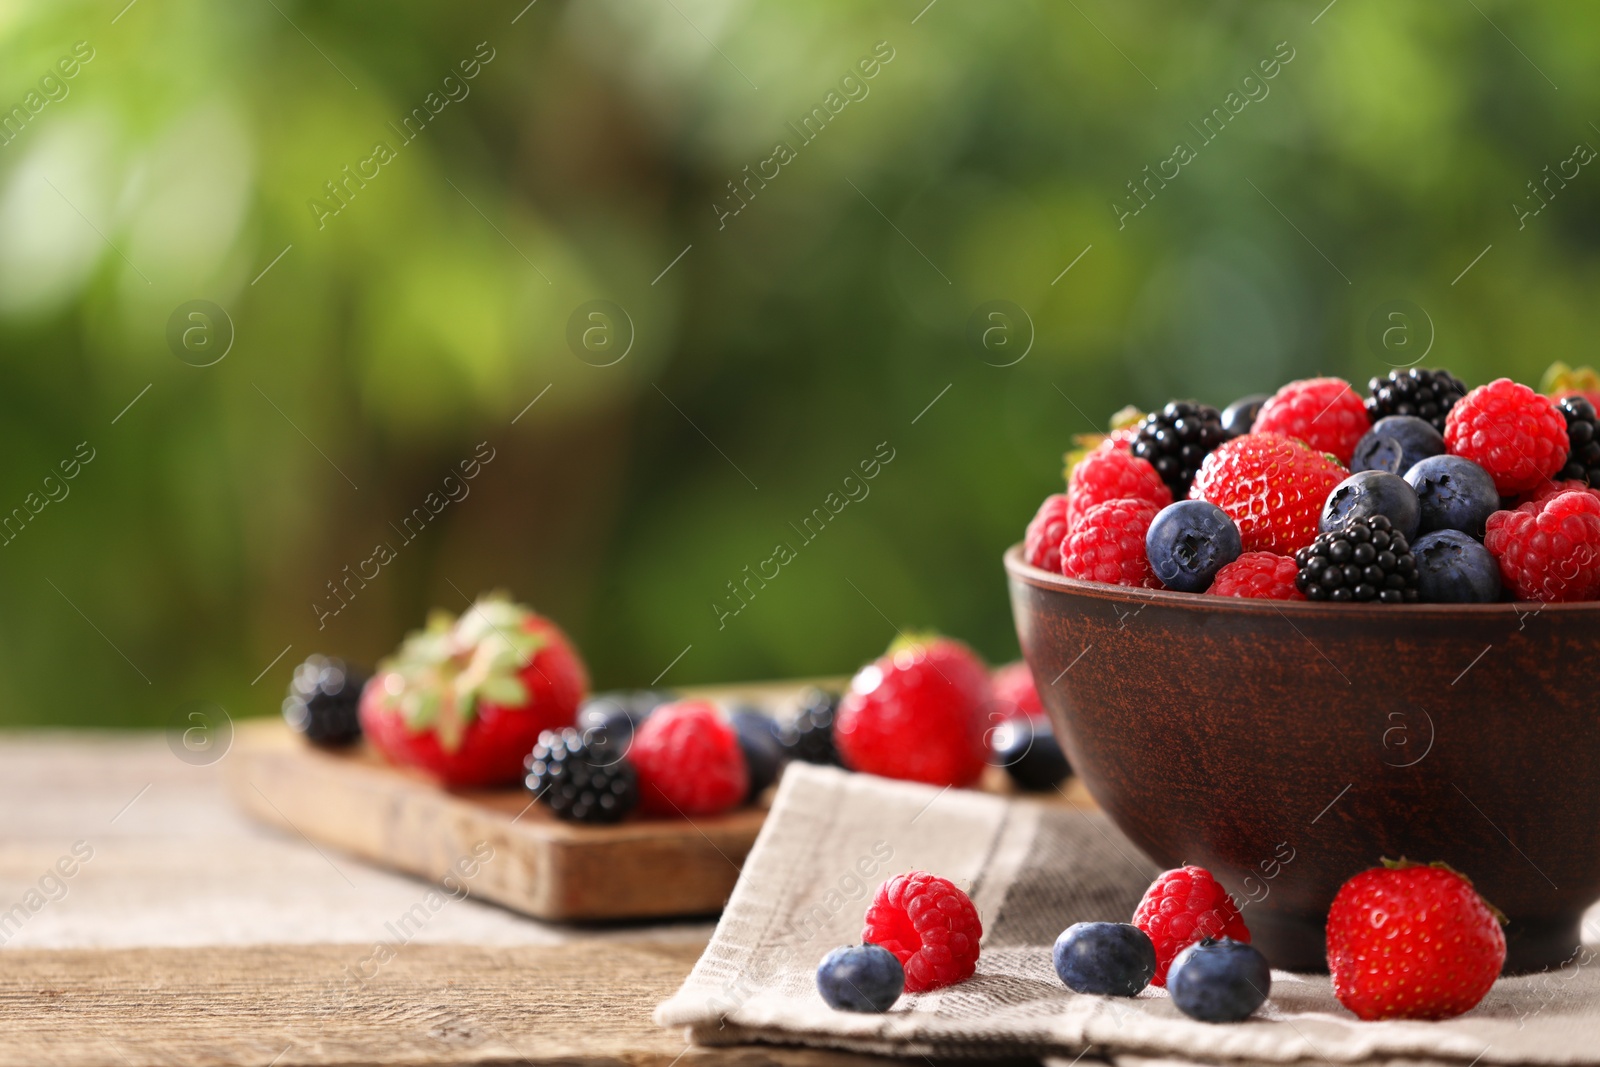 Photo of Bowl and different fresh ripe berries on wooden table outdoors, space for text